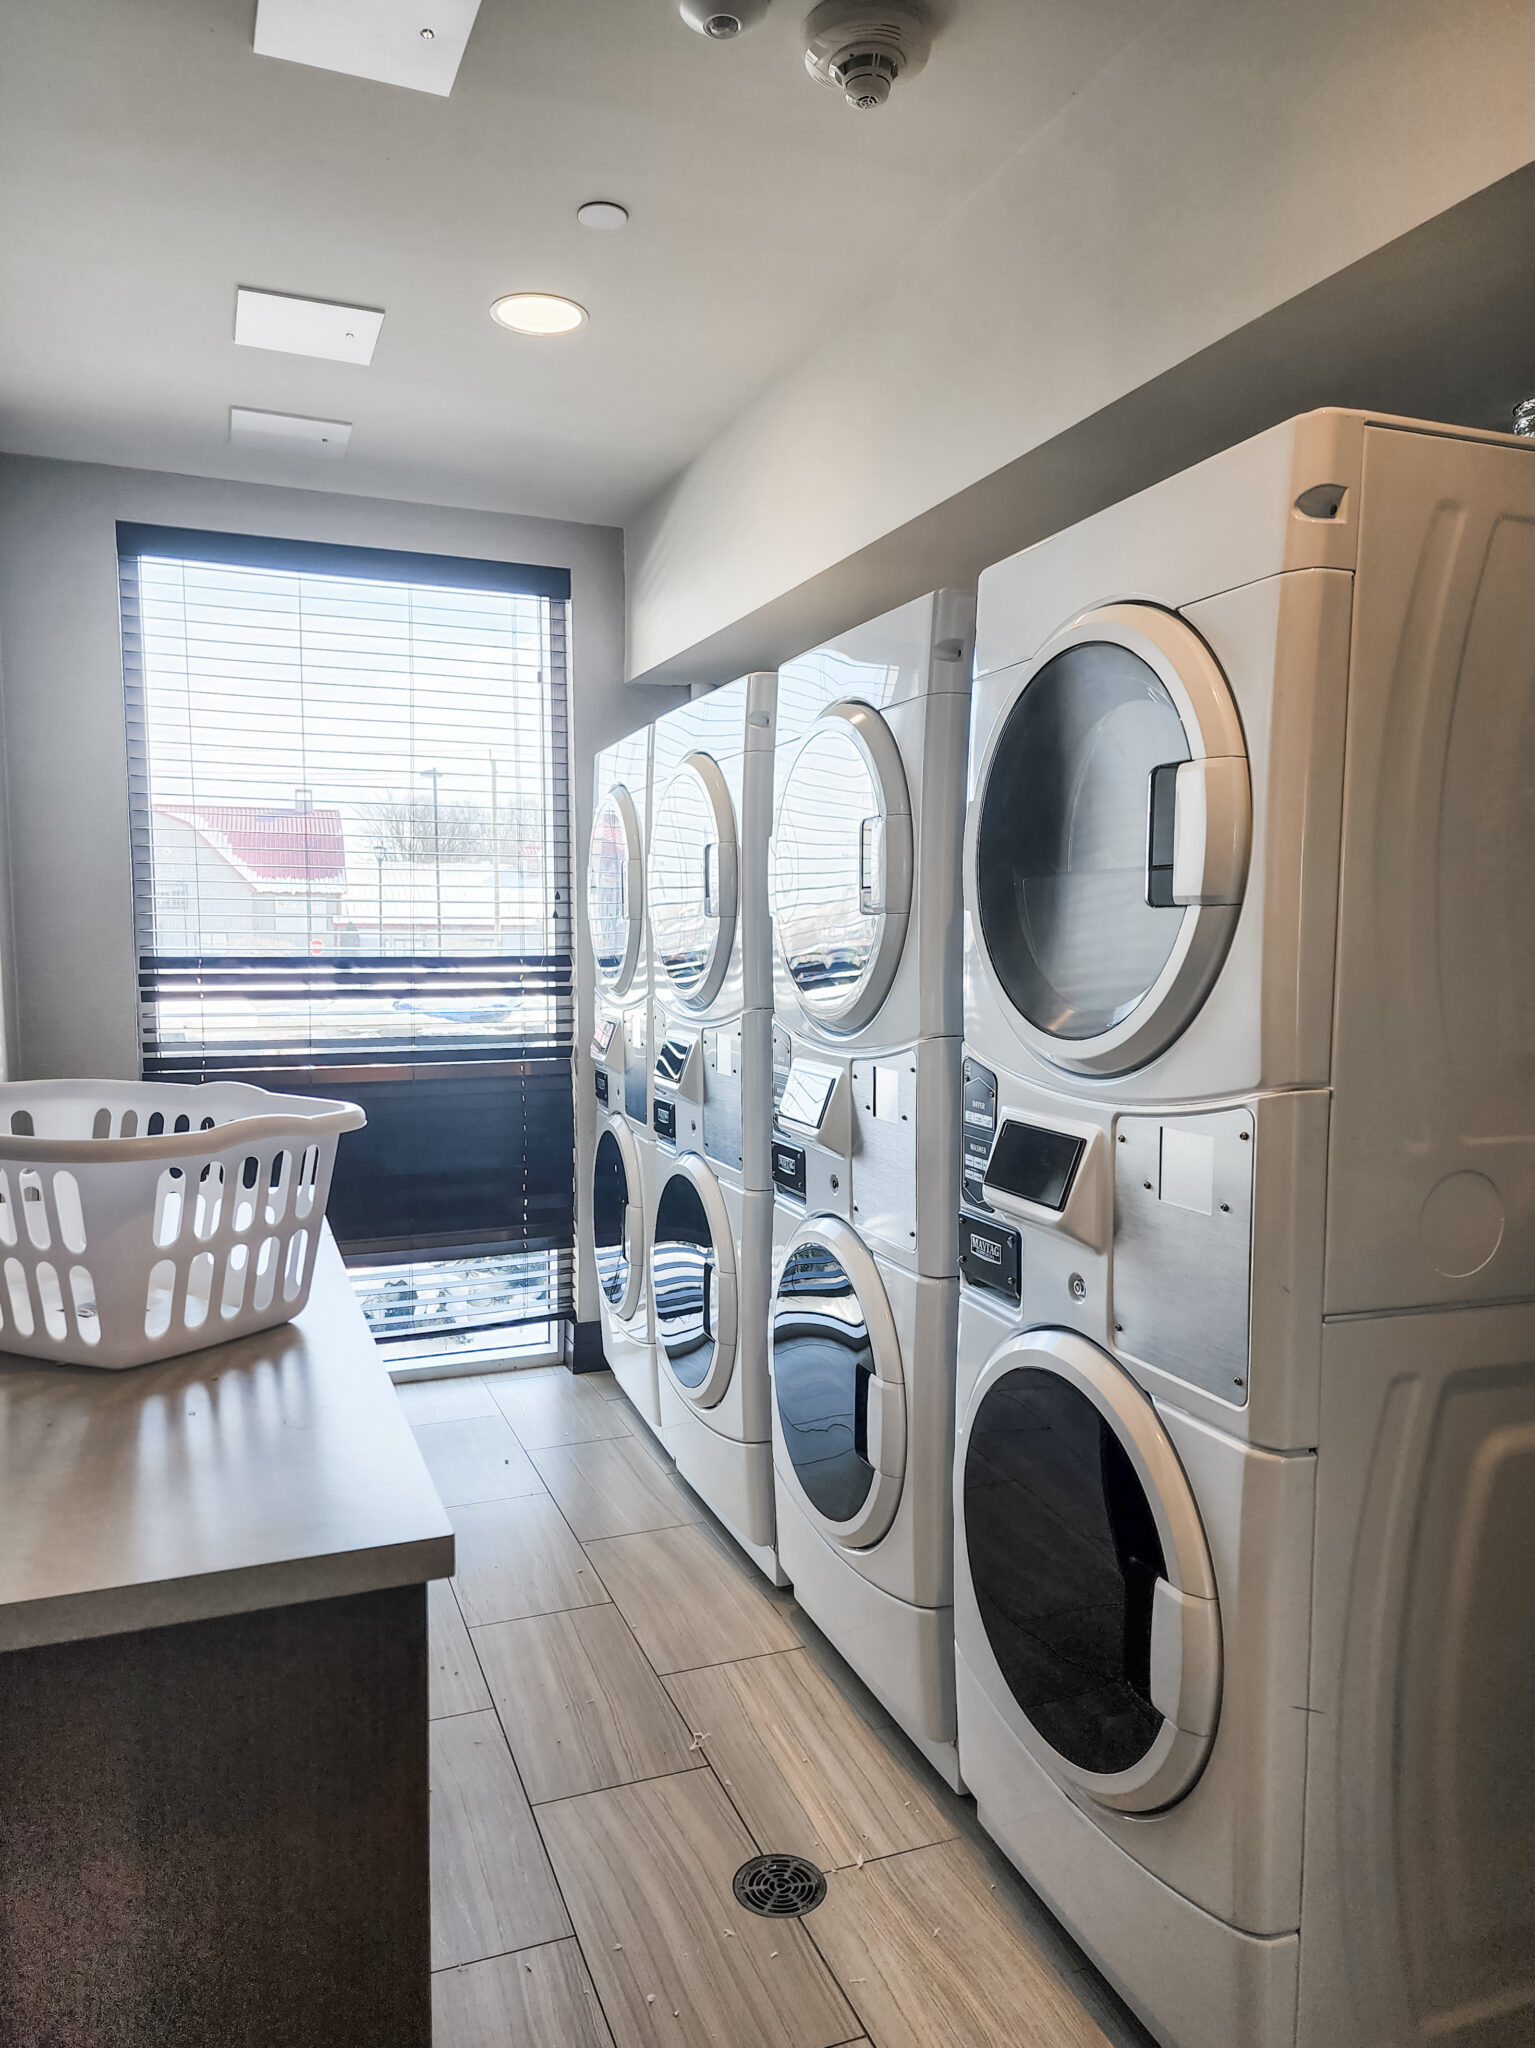 Guest laundry services shows 4 stacks of modern washer and dryers.